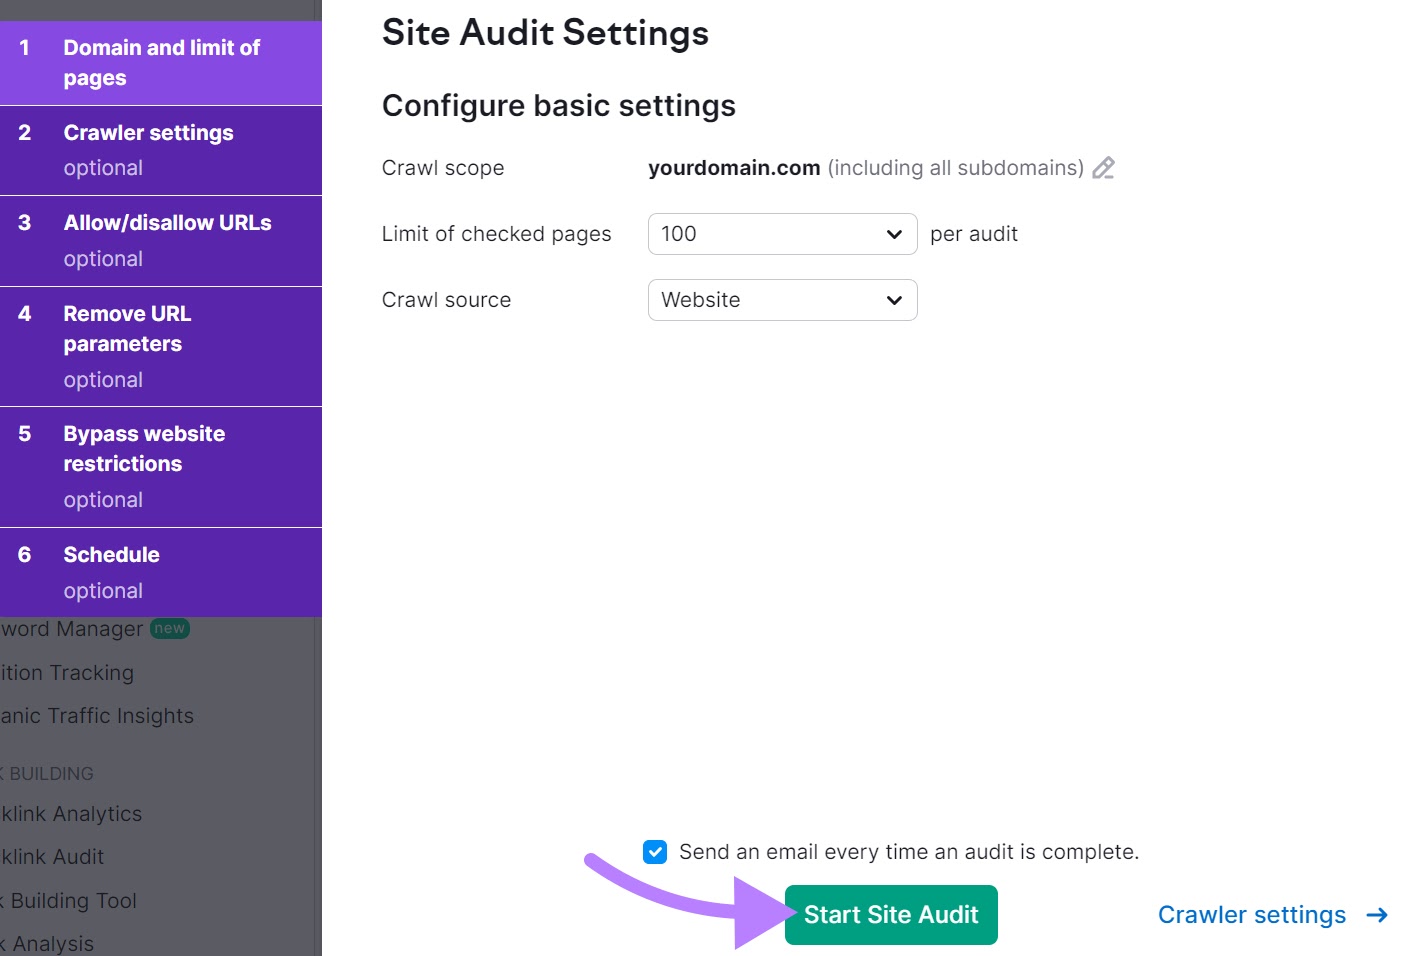 Site Audit configuration page to select crawl scope, source, and limit of checked pages with "Start Site Audit" clicked.